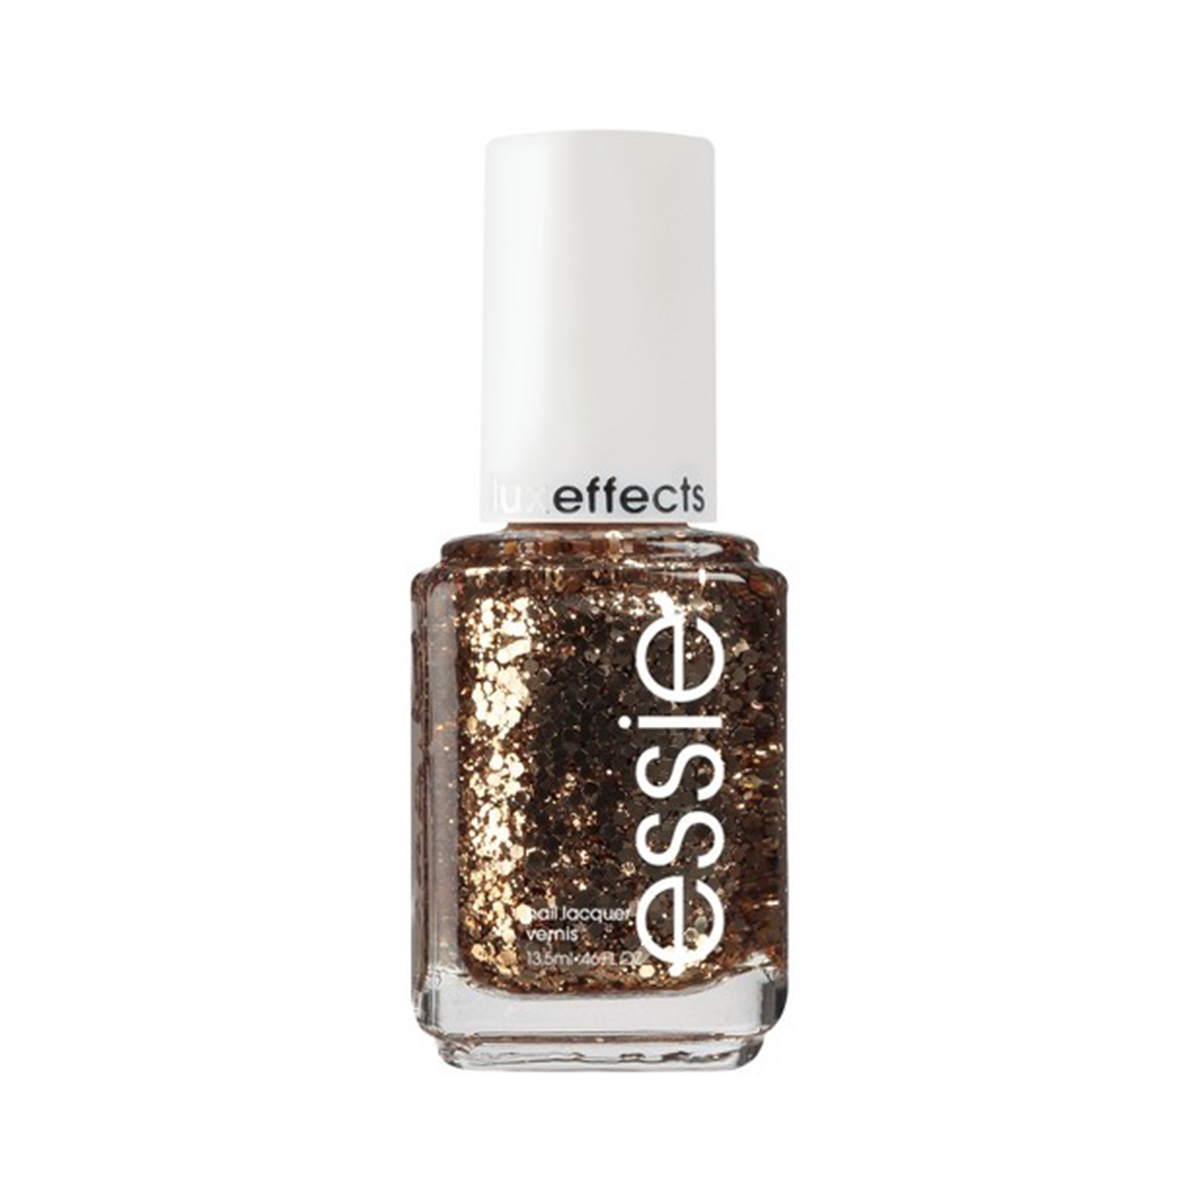 Essie Nail Polish in Summit of Style